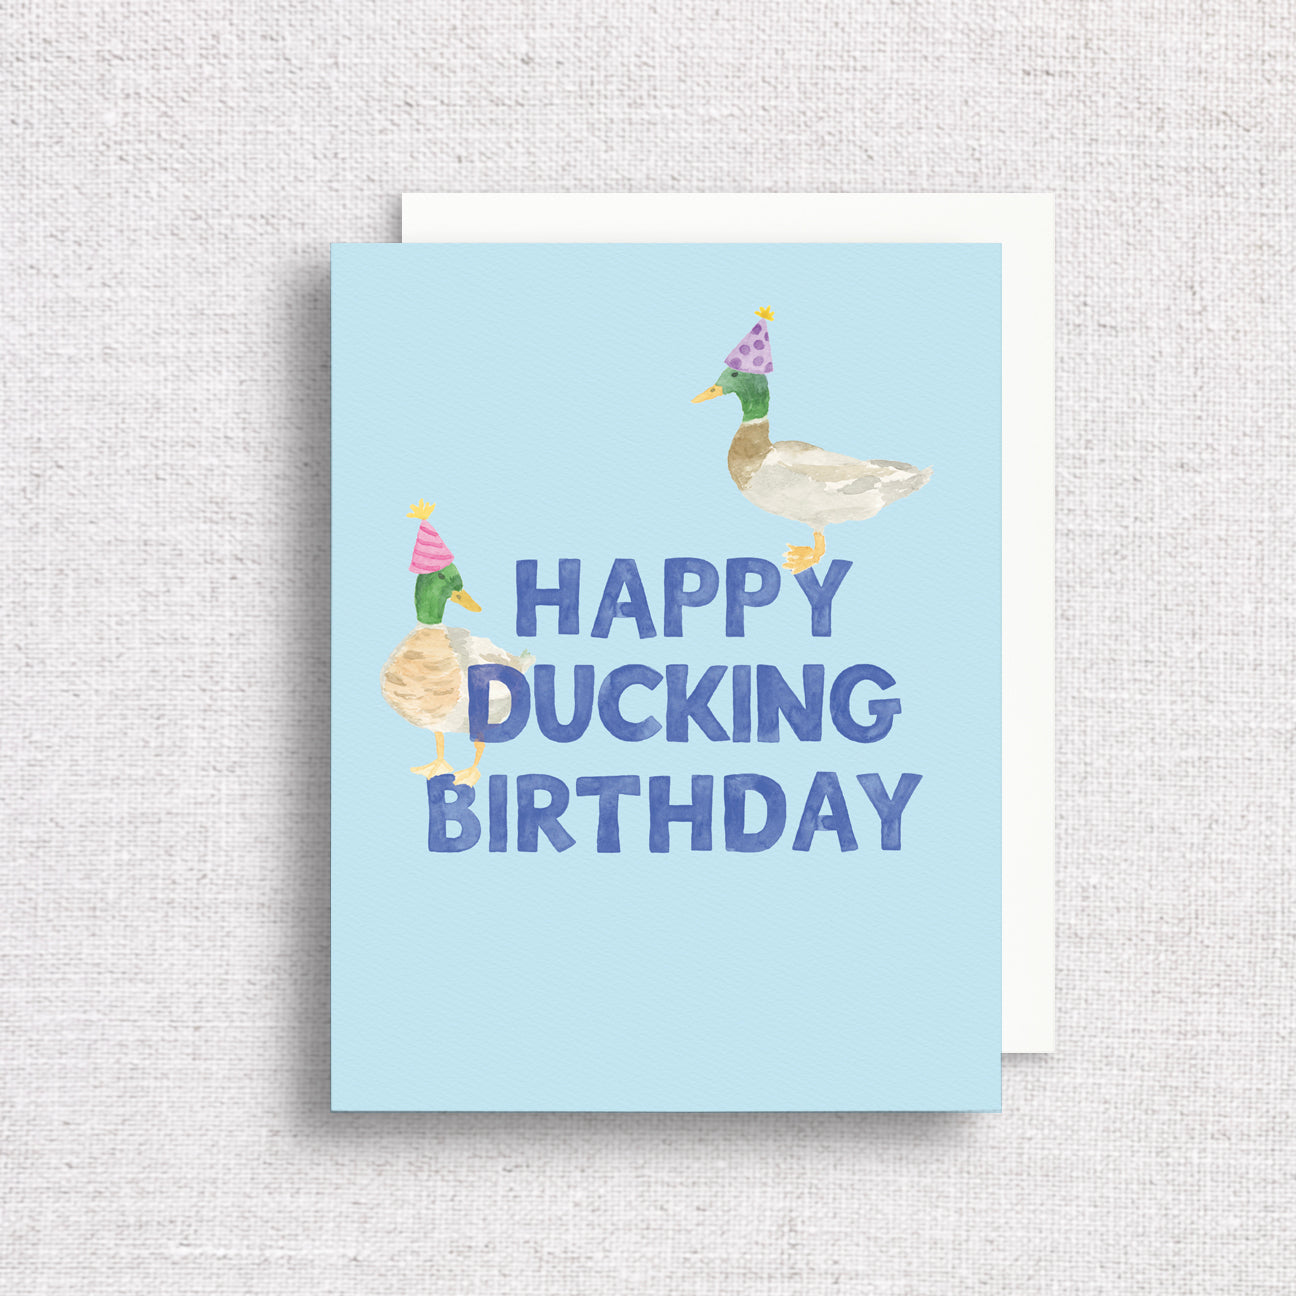 Happy Ducking Birthday Greeting Card by Gert & Co